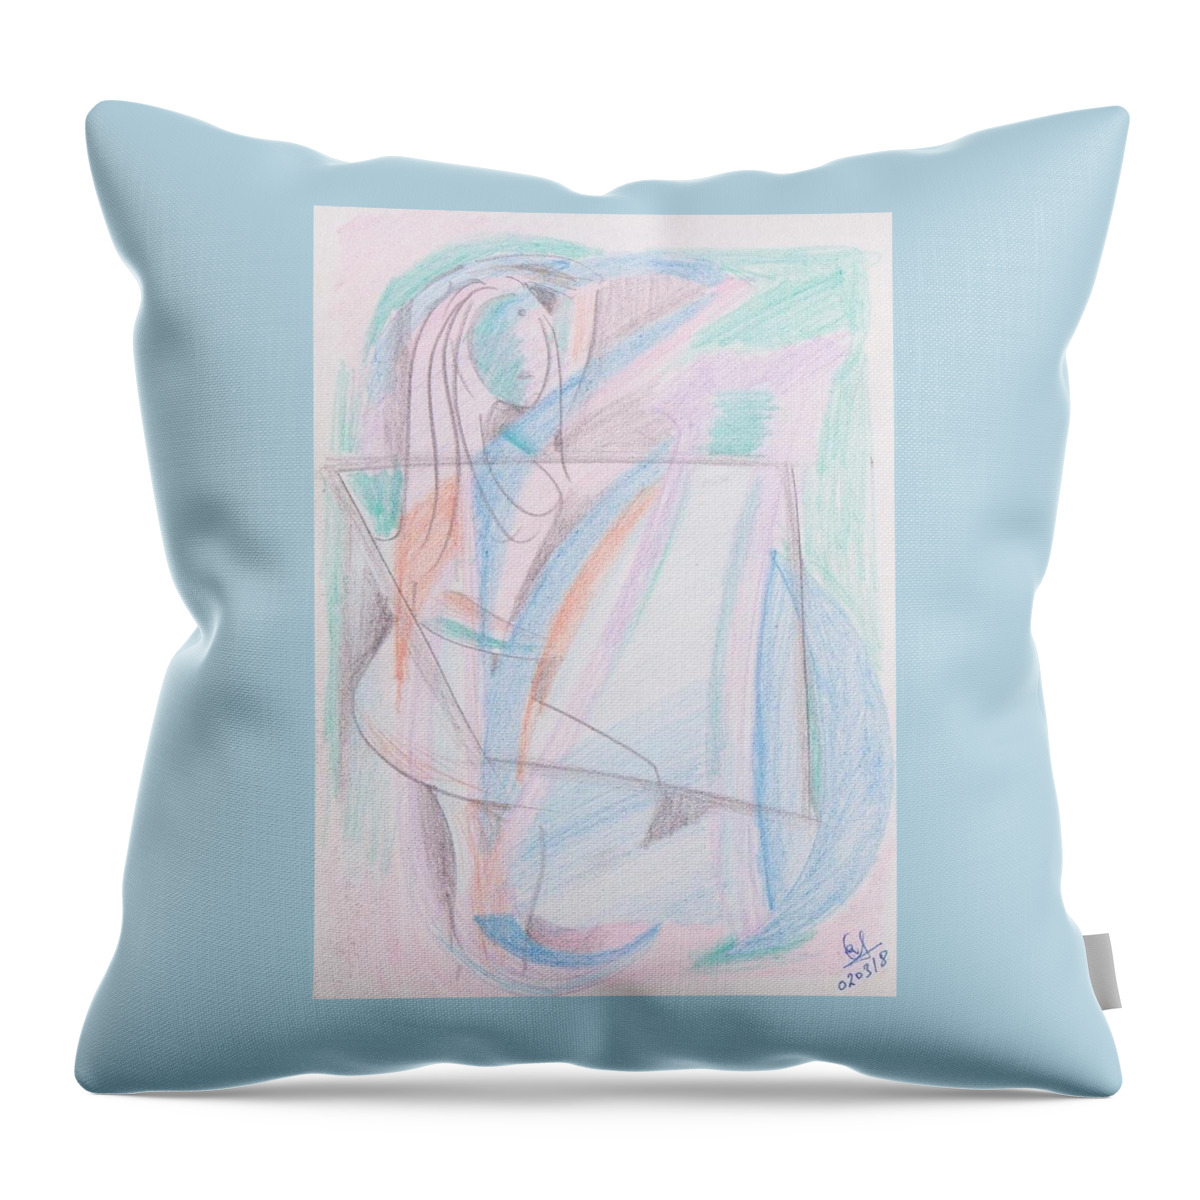 Pencil Color On Paper Throw Pillow featuring the drawing When I Was Teenage by Mustafa Attari